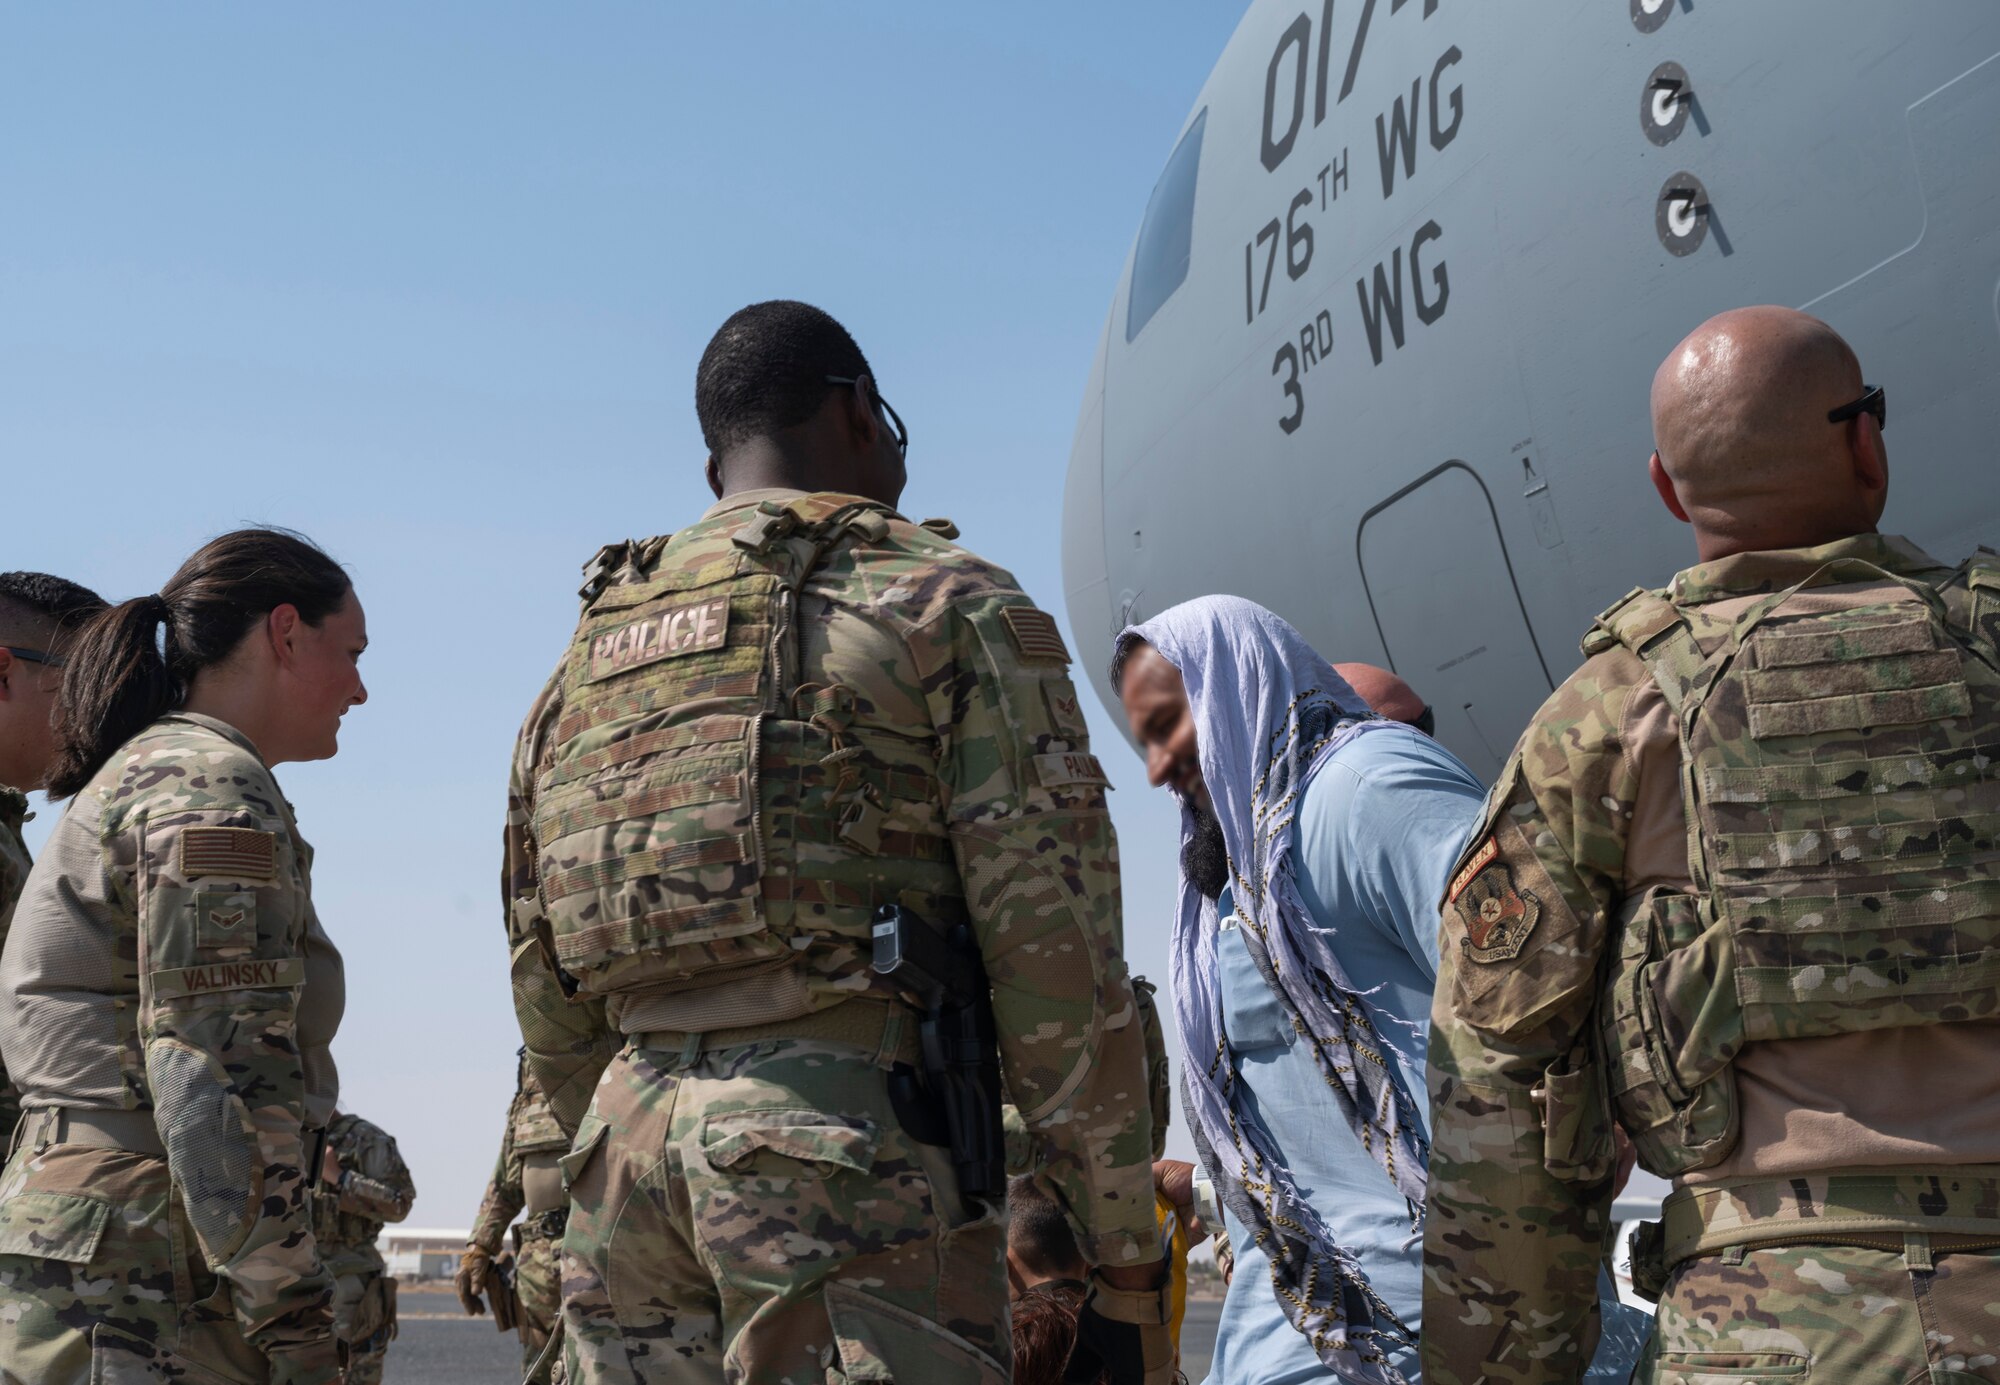 Afghanistan evacuees arrive on a C-17 Globemaster III aircraft, crewed by Alaska Air National Guard members from the 144th Airlift Squadron, of the 176th Wing, and active-duty Airmen from the 517th Airlift Squadron, of the 3rd Wing, at Ali Al Salem Air Base, Kuwait, Aug. 23, 2021. U.S. Air Force Airmen are assisting with evacuations of Americans and allied civilian personnel from Afghanistan.